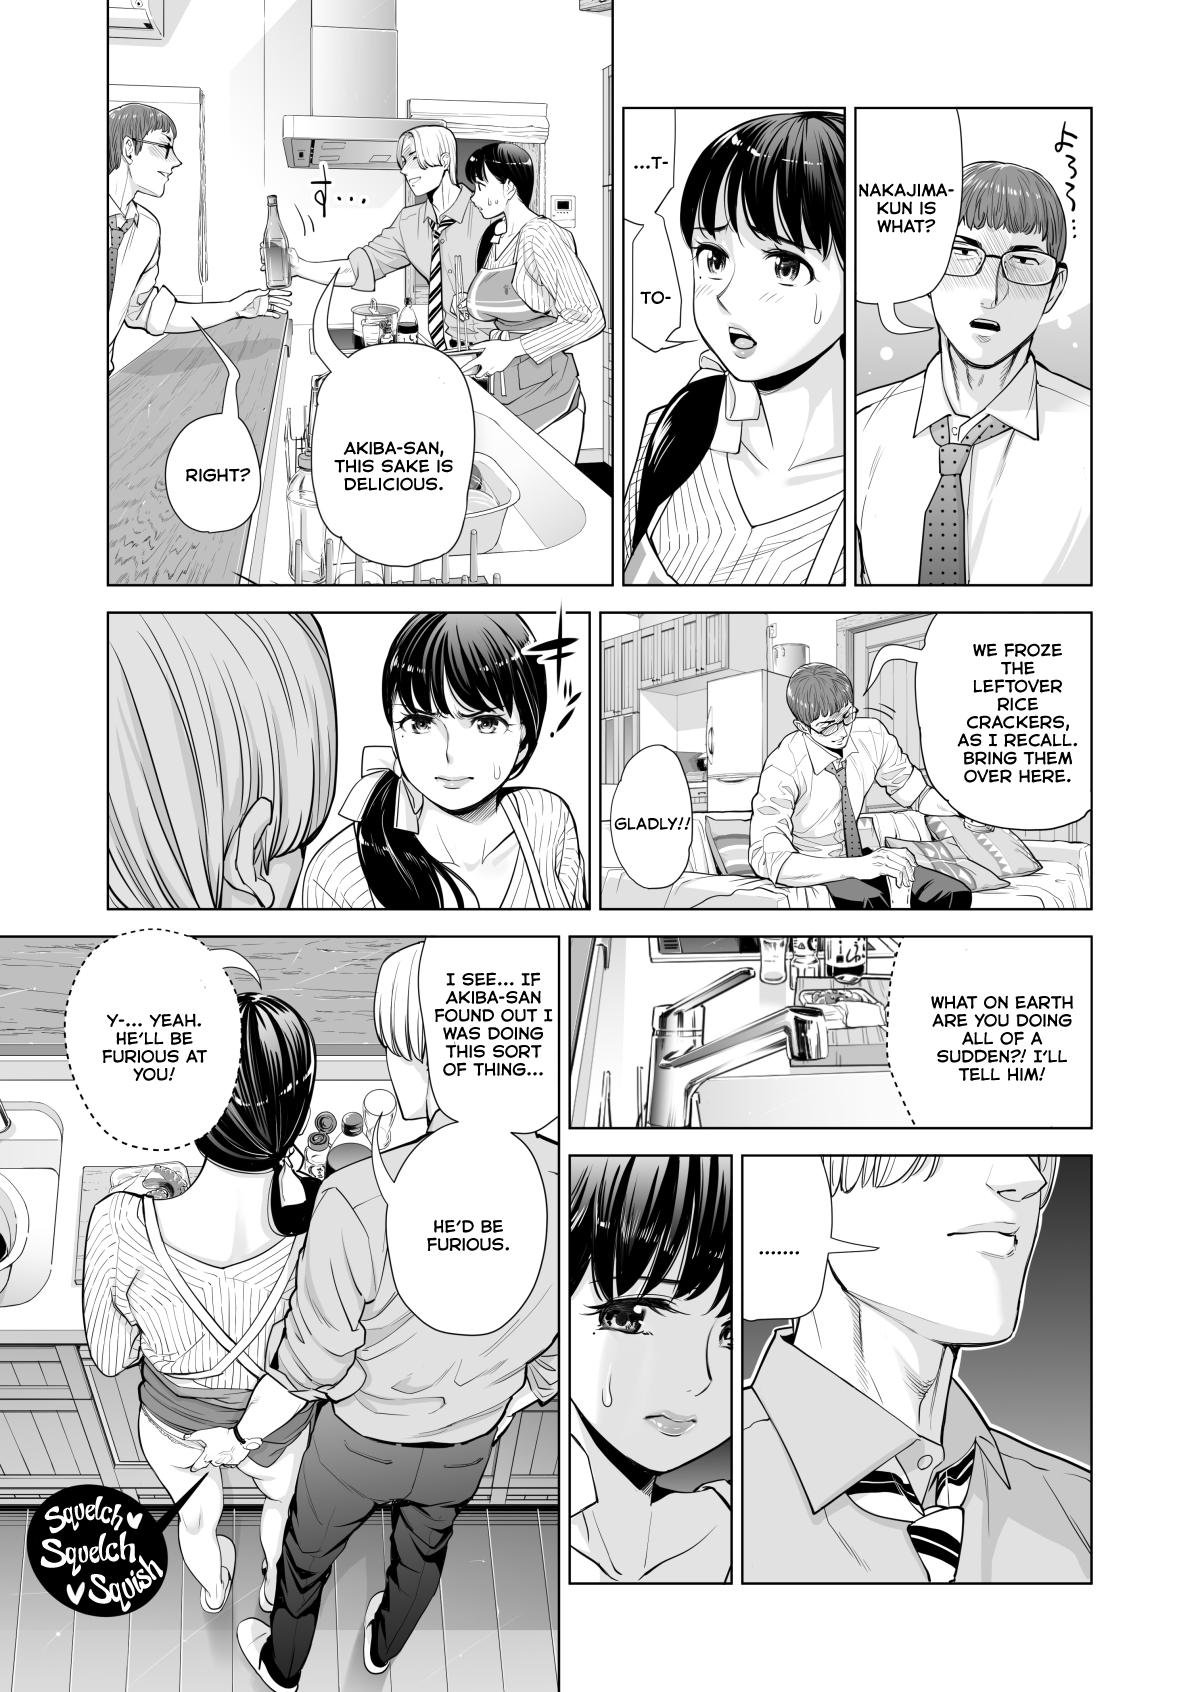 [HGT Lab (Tsusauto)] Tsukiyo no Midare Zake (Zenpen) Moonlit Intoxication ~ A Housewife Stolen by a Coworker Besides her Blackout Drunk Husband ~ Chapter 1 [English] 27